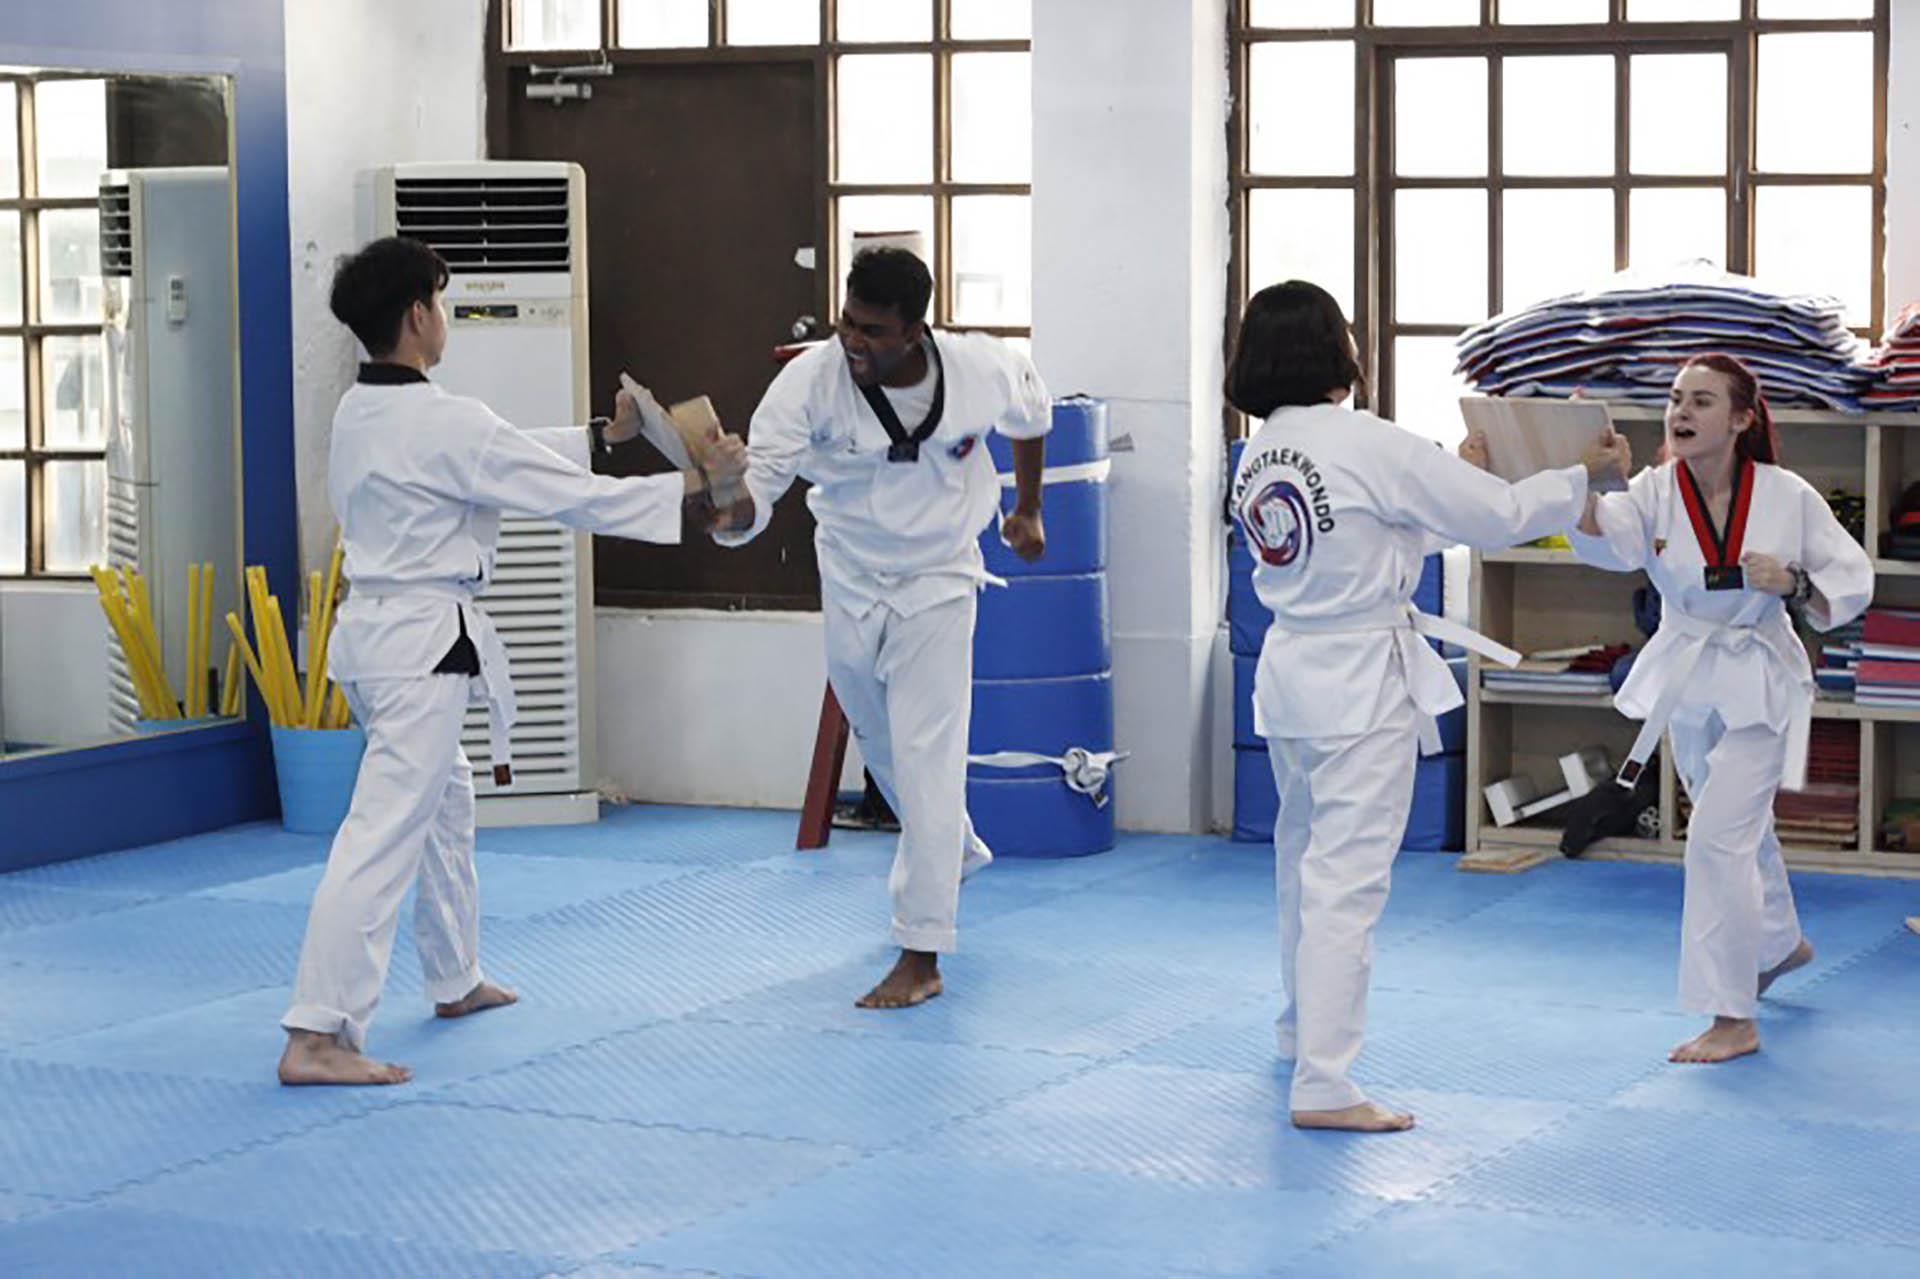 Let's try Korean Taekwondo - no previous experience required